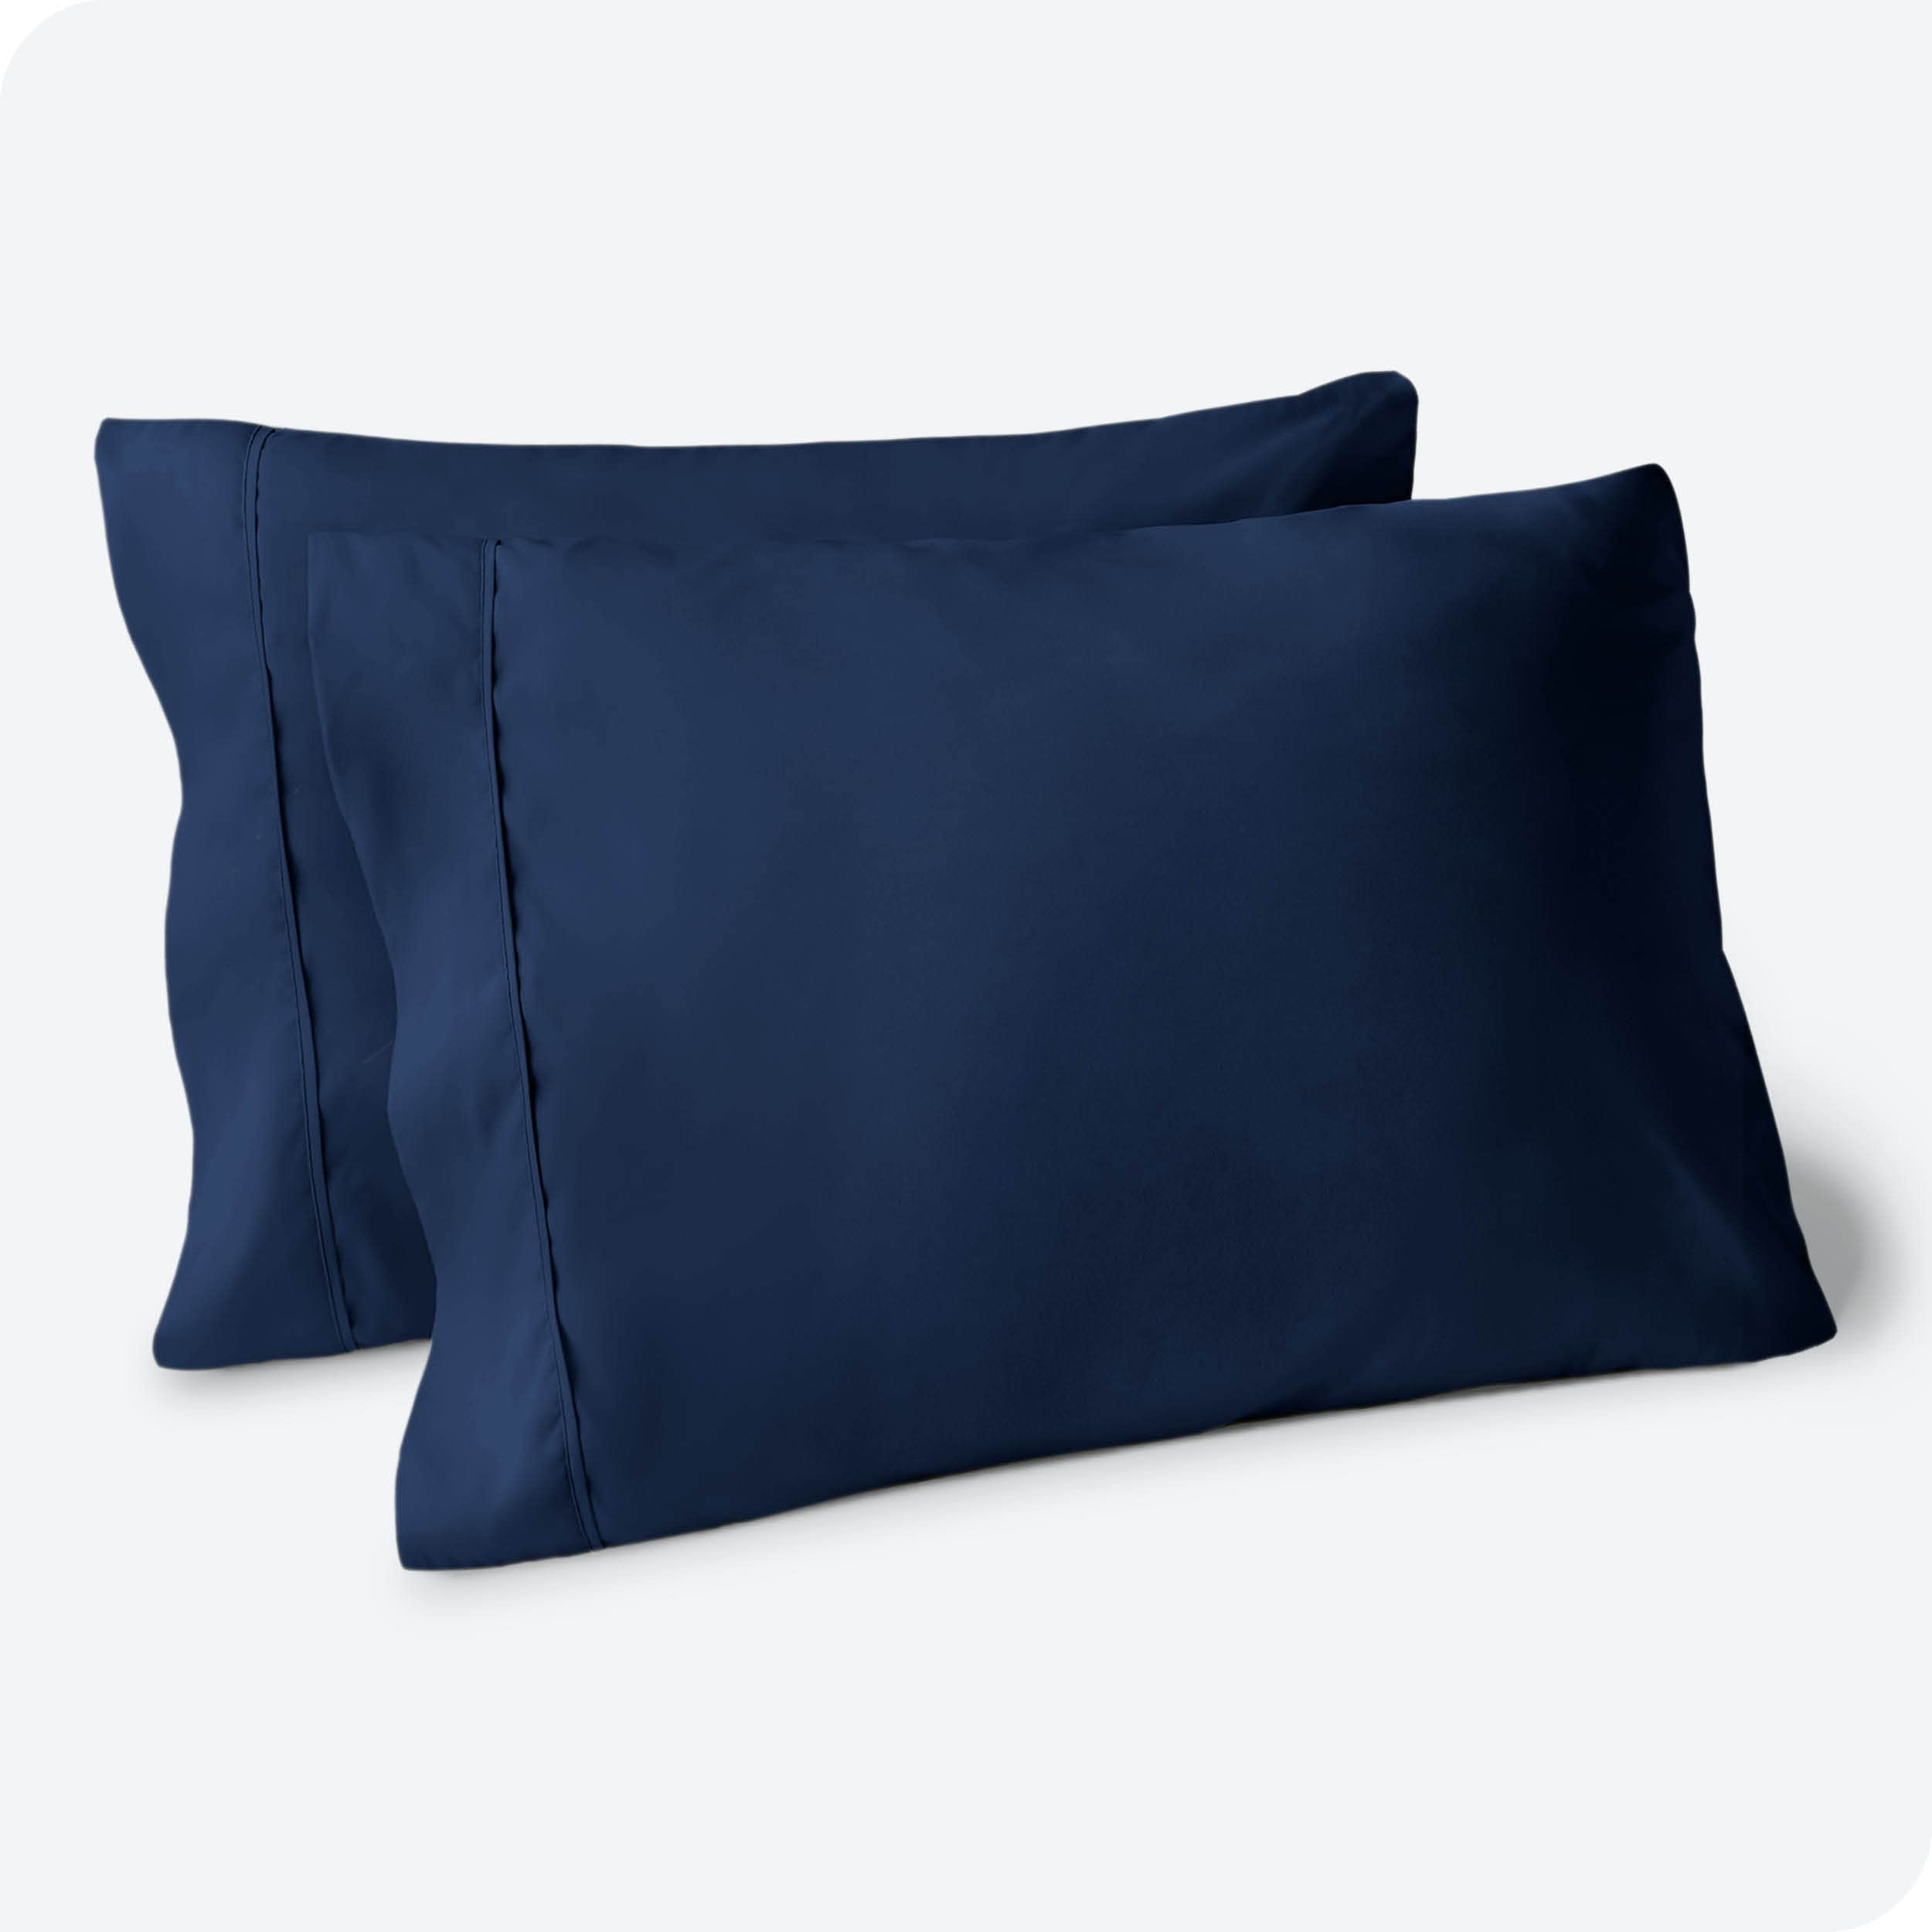 Book Cover Bare Home Microfiber Pillow Cases - Standard/Queen Size Set of 2 - Cooling Pillowcases - Double Brushed - Dark Blue Pillowcases 2 Pack - Easy Care (Standard Pillowcase Set of 2, Dark Blue)